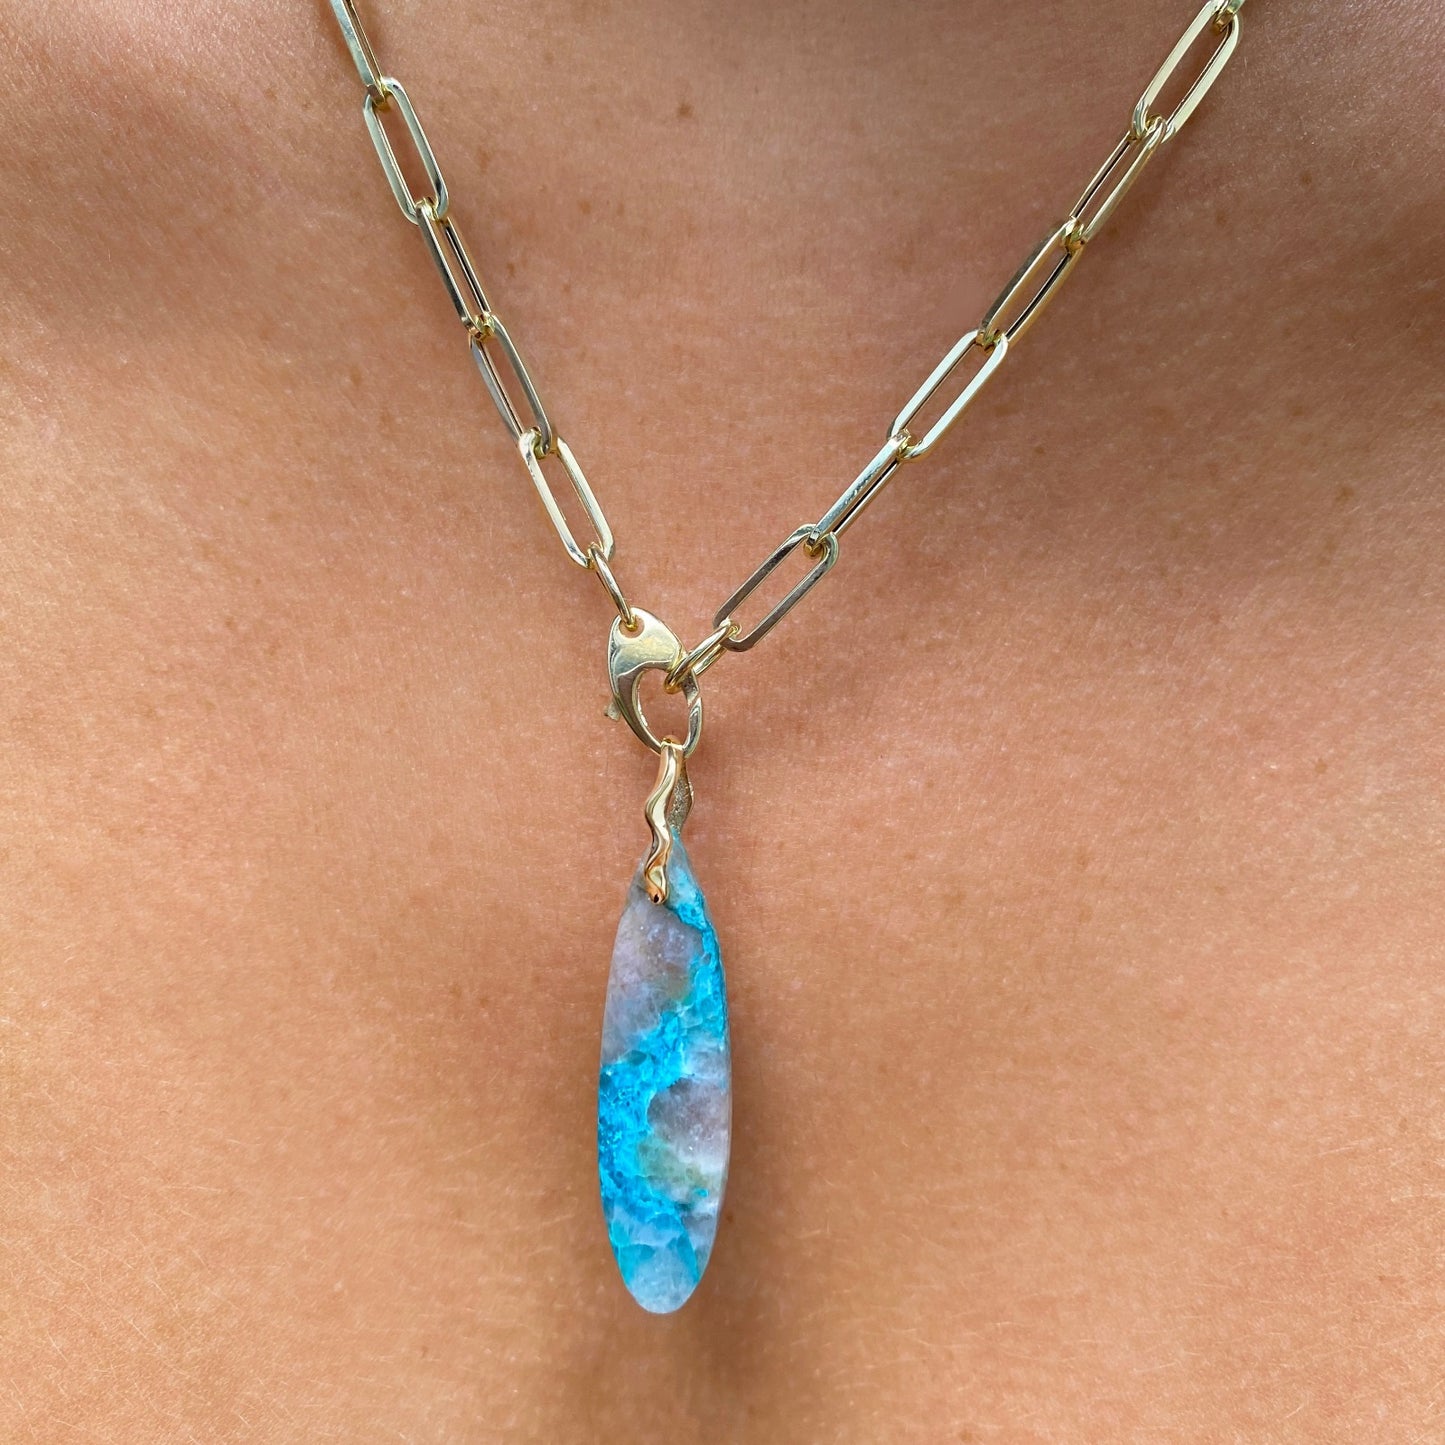 Chrysocolla in Quartz Surfboard Charm. Styled on a neck hanging from the lobster clasp of a paperclip chain necklace.